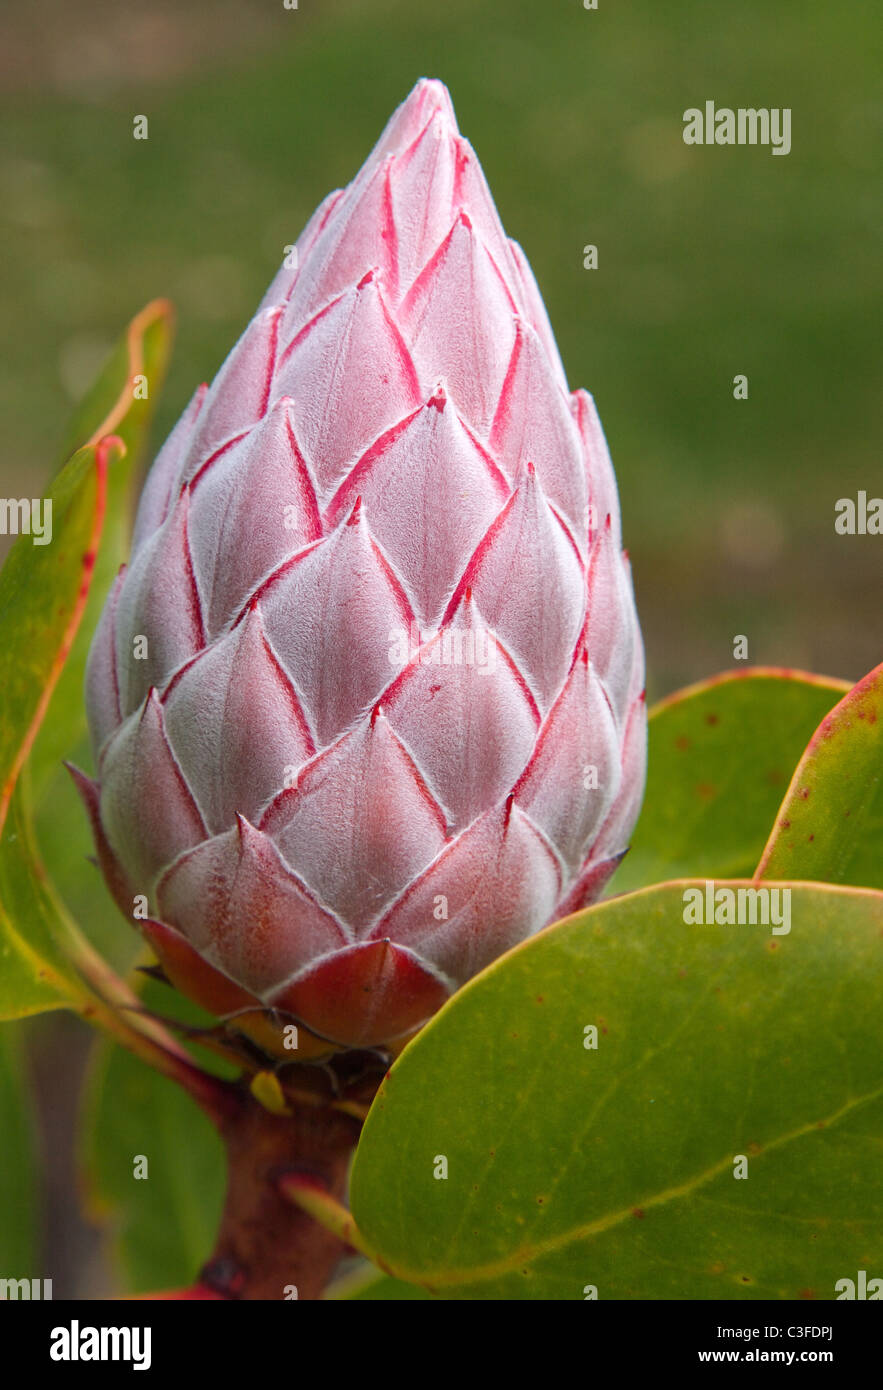 Large flower bud of King Protea Protea cynaroides growing in Tresco Abbey Gardens on the Isles of Scilly Stock Photo